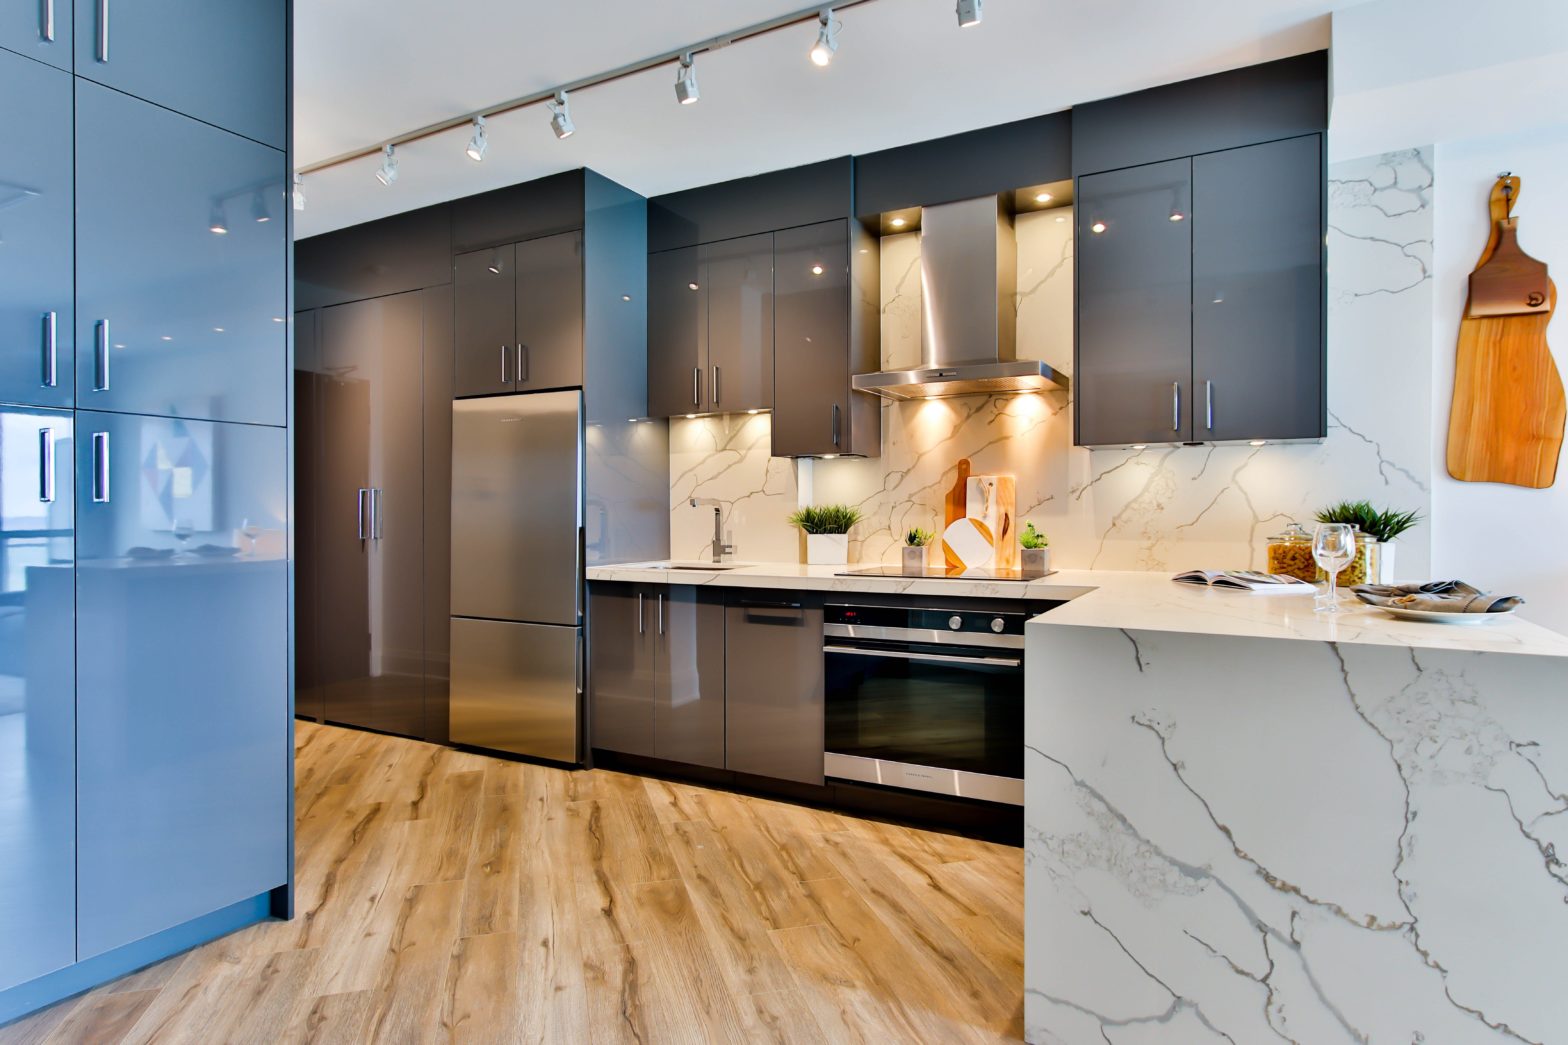 Playing with 2D and 3D kitchen design software can knock your socks off when you're exploring more effective kitchen layouts for your space. But without an experienced kitchen planner and builder, your design ideas will only be as strong as the internet connection.